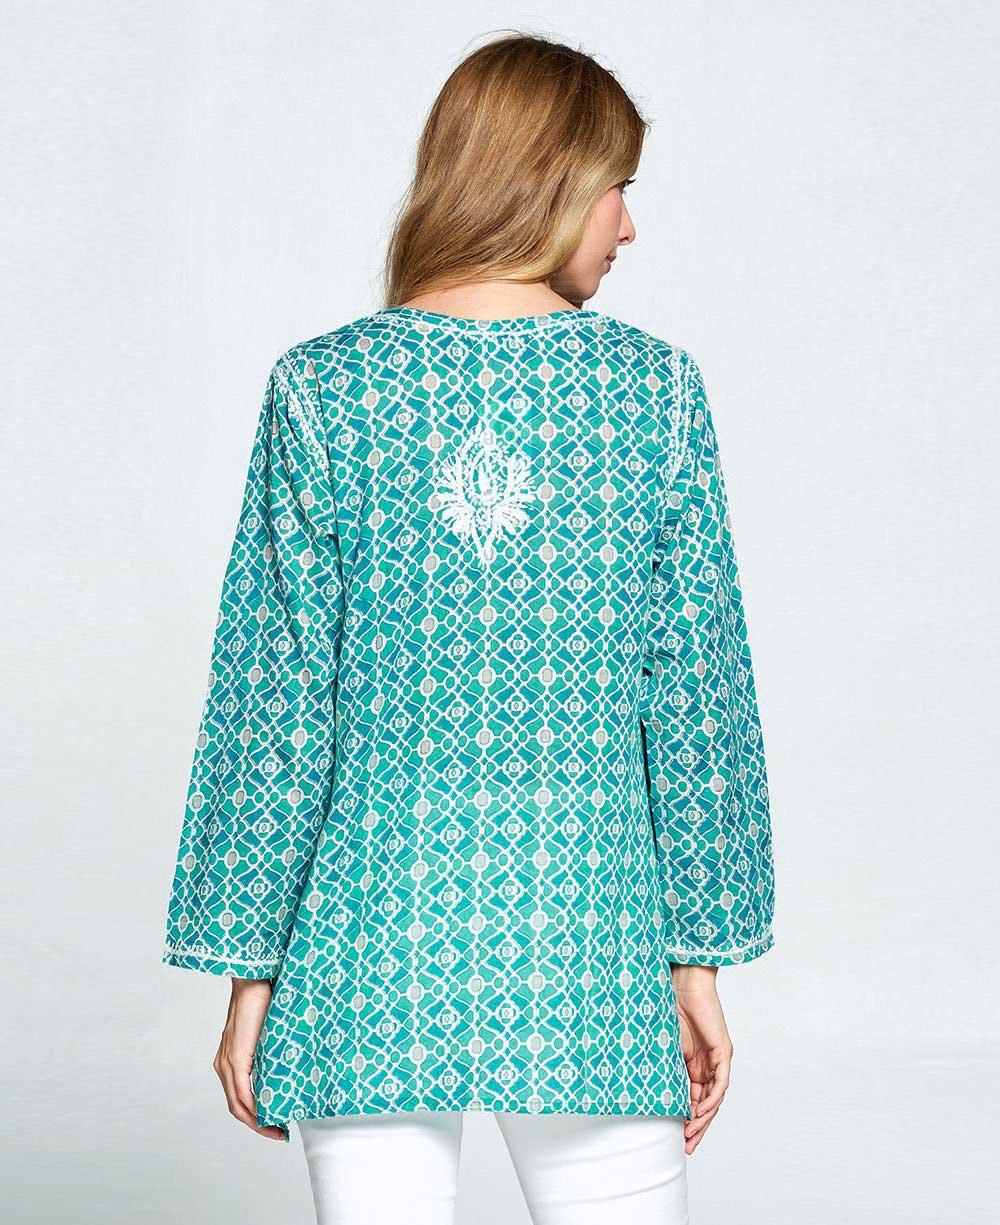 Women’s Embroidered Mosaic Tunic Top